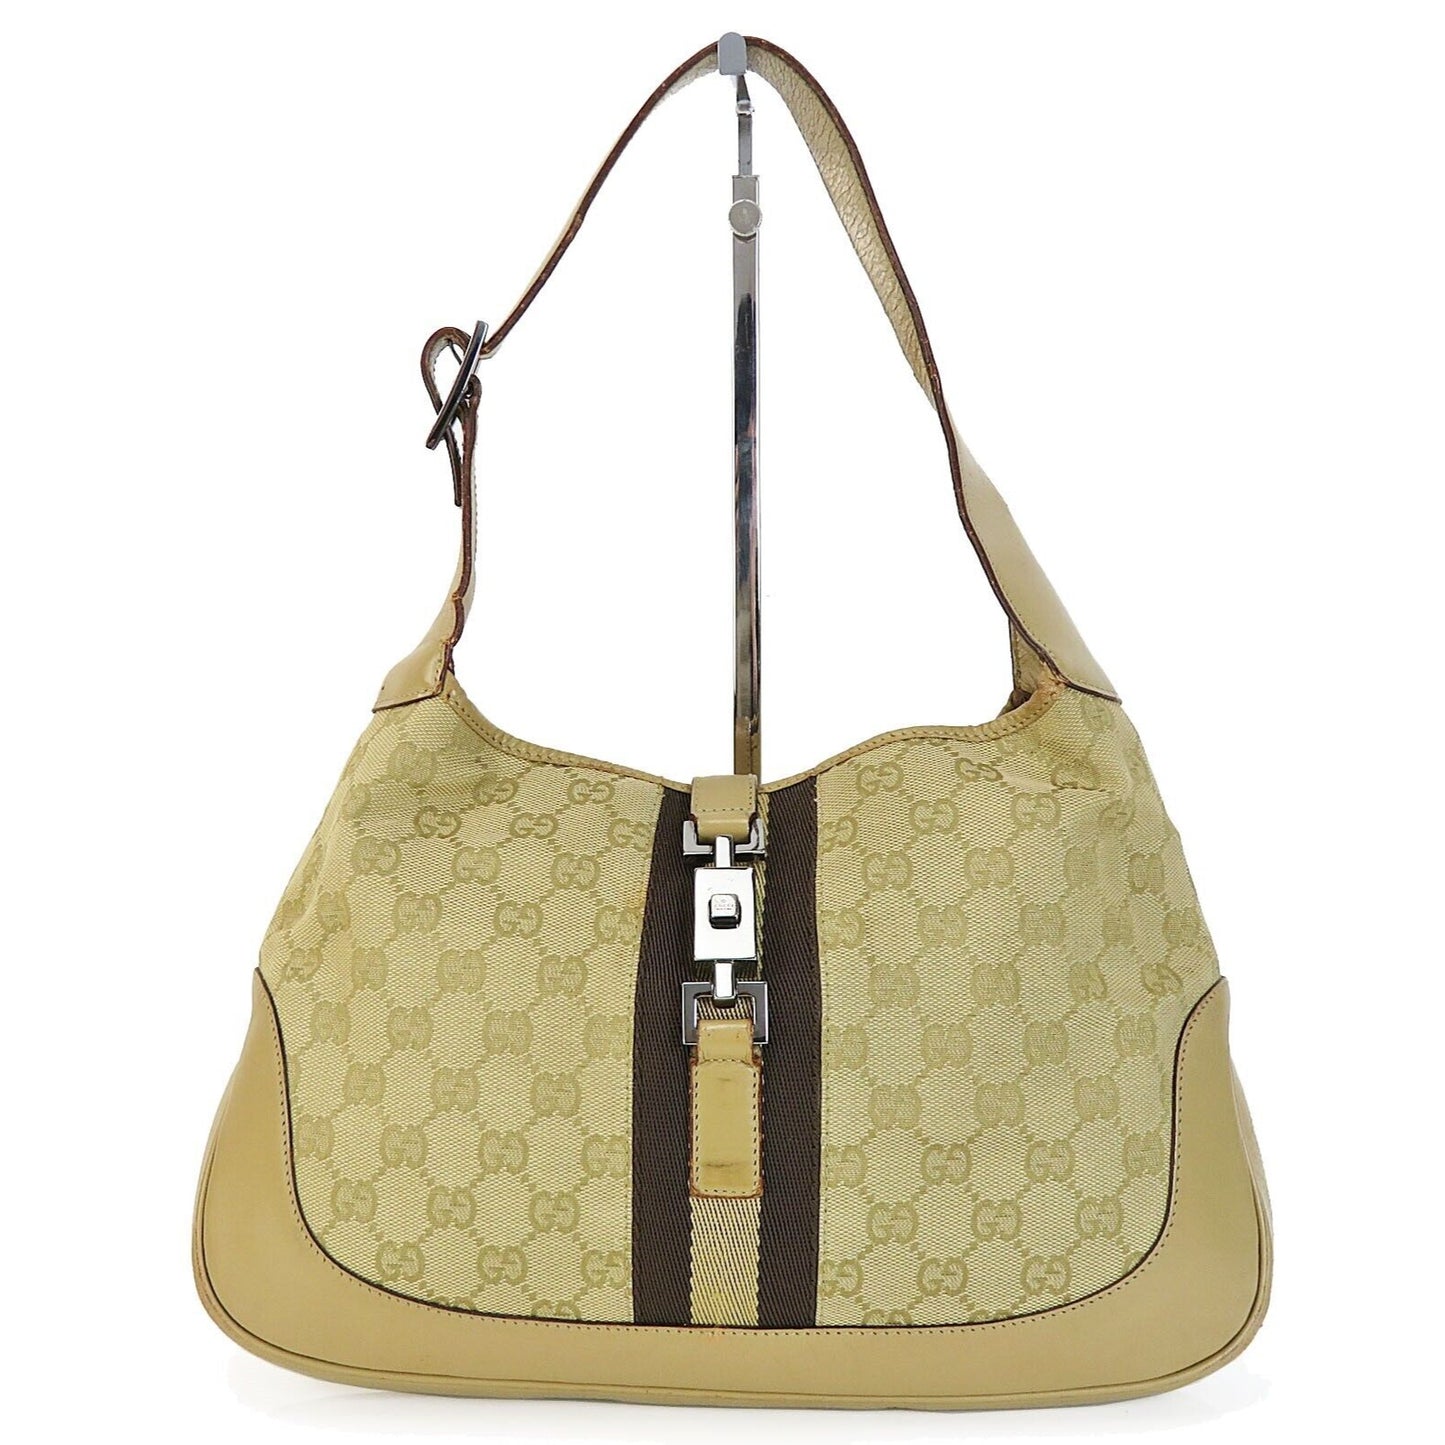 Gucci, light yellow fabric with a camel Guccissima print and metallic leather, Tom Ford era Jackie- O shoulder bag with a